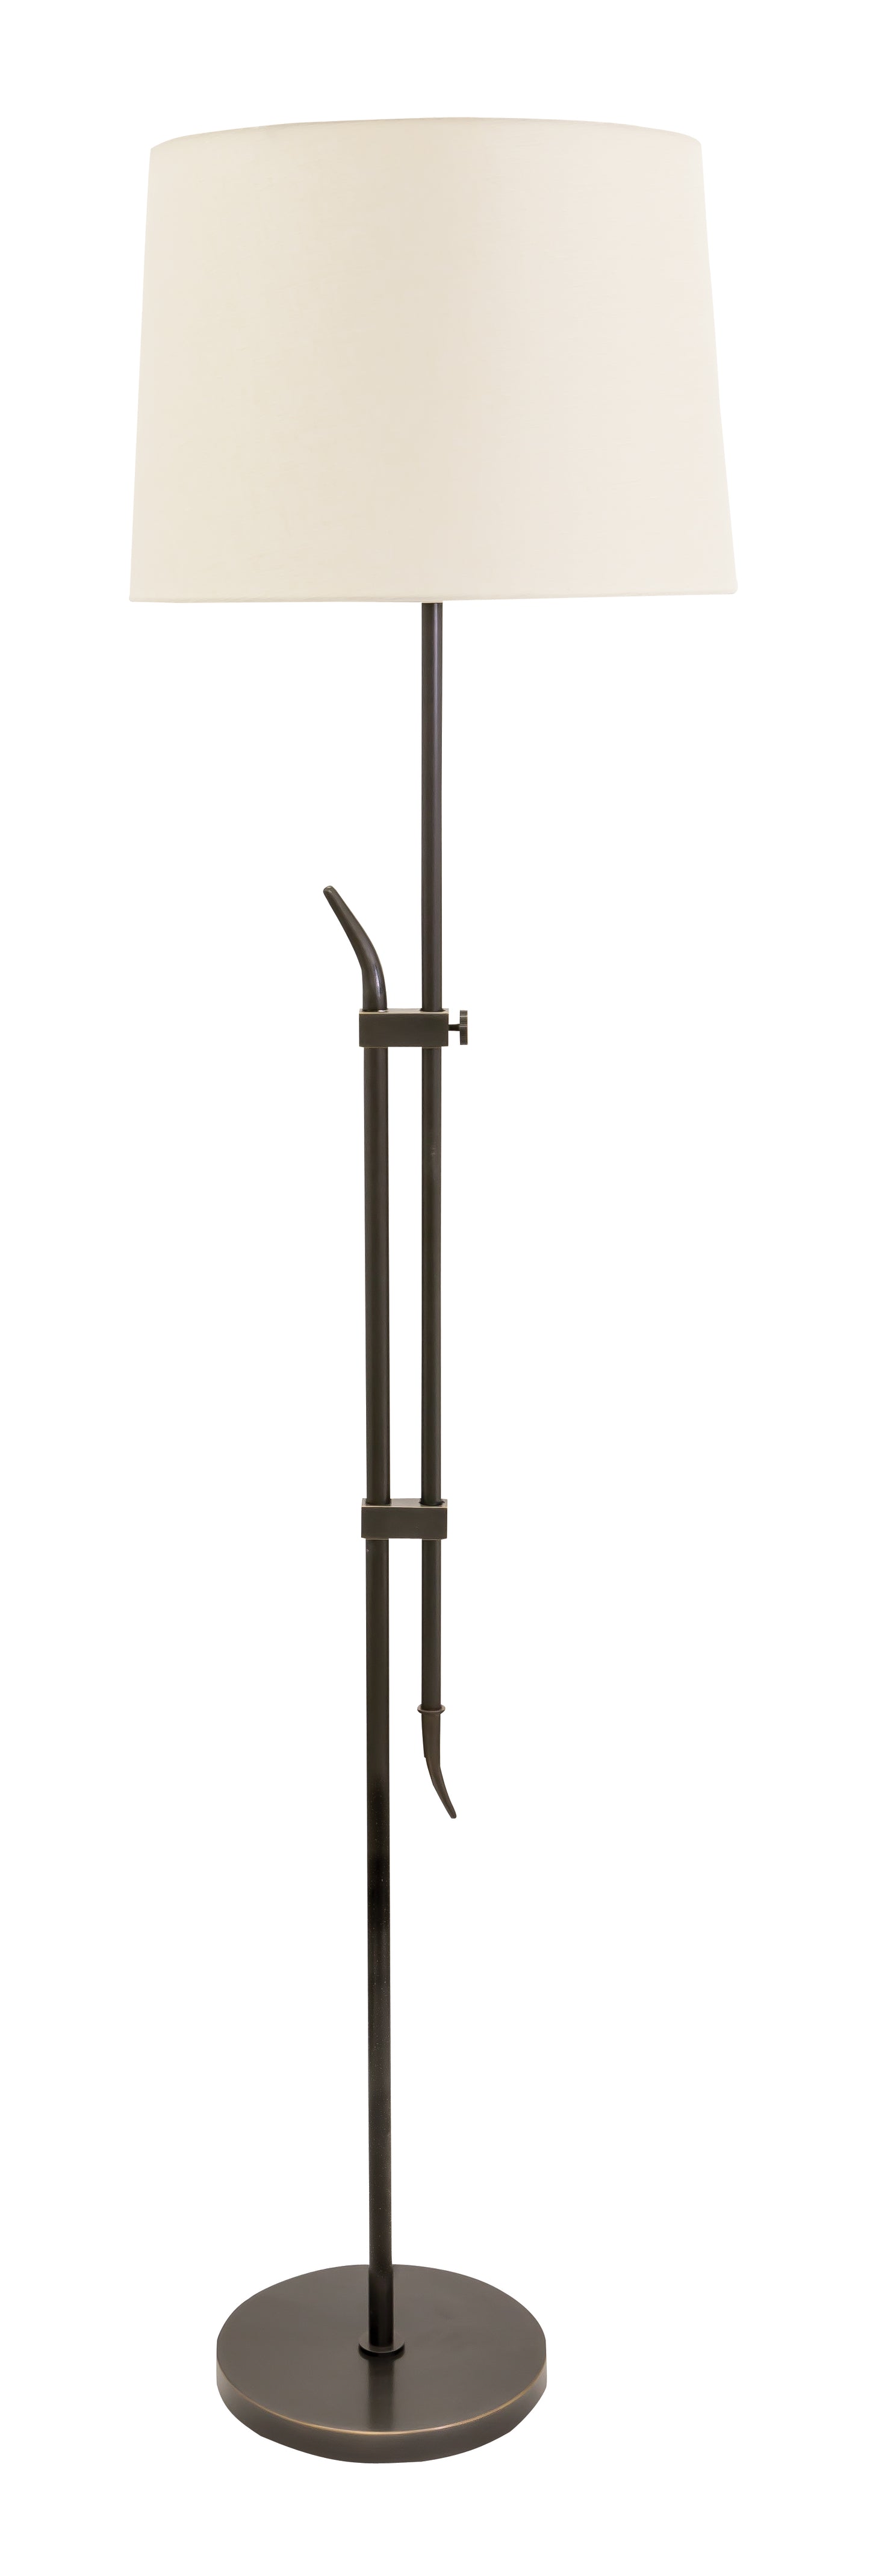 House of Troy 61" Windsor Adjustable Floor Lamp in Oil Rubbed Bronze W400-OB